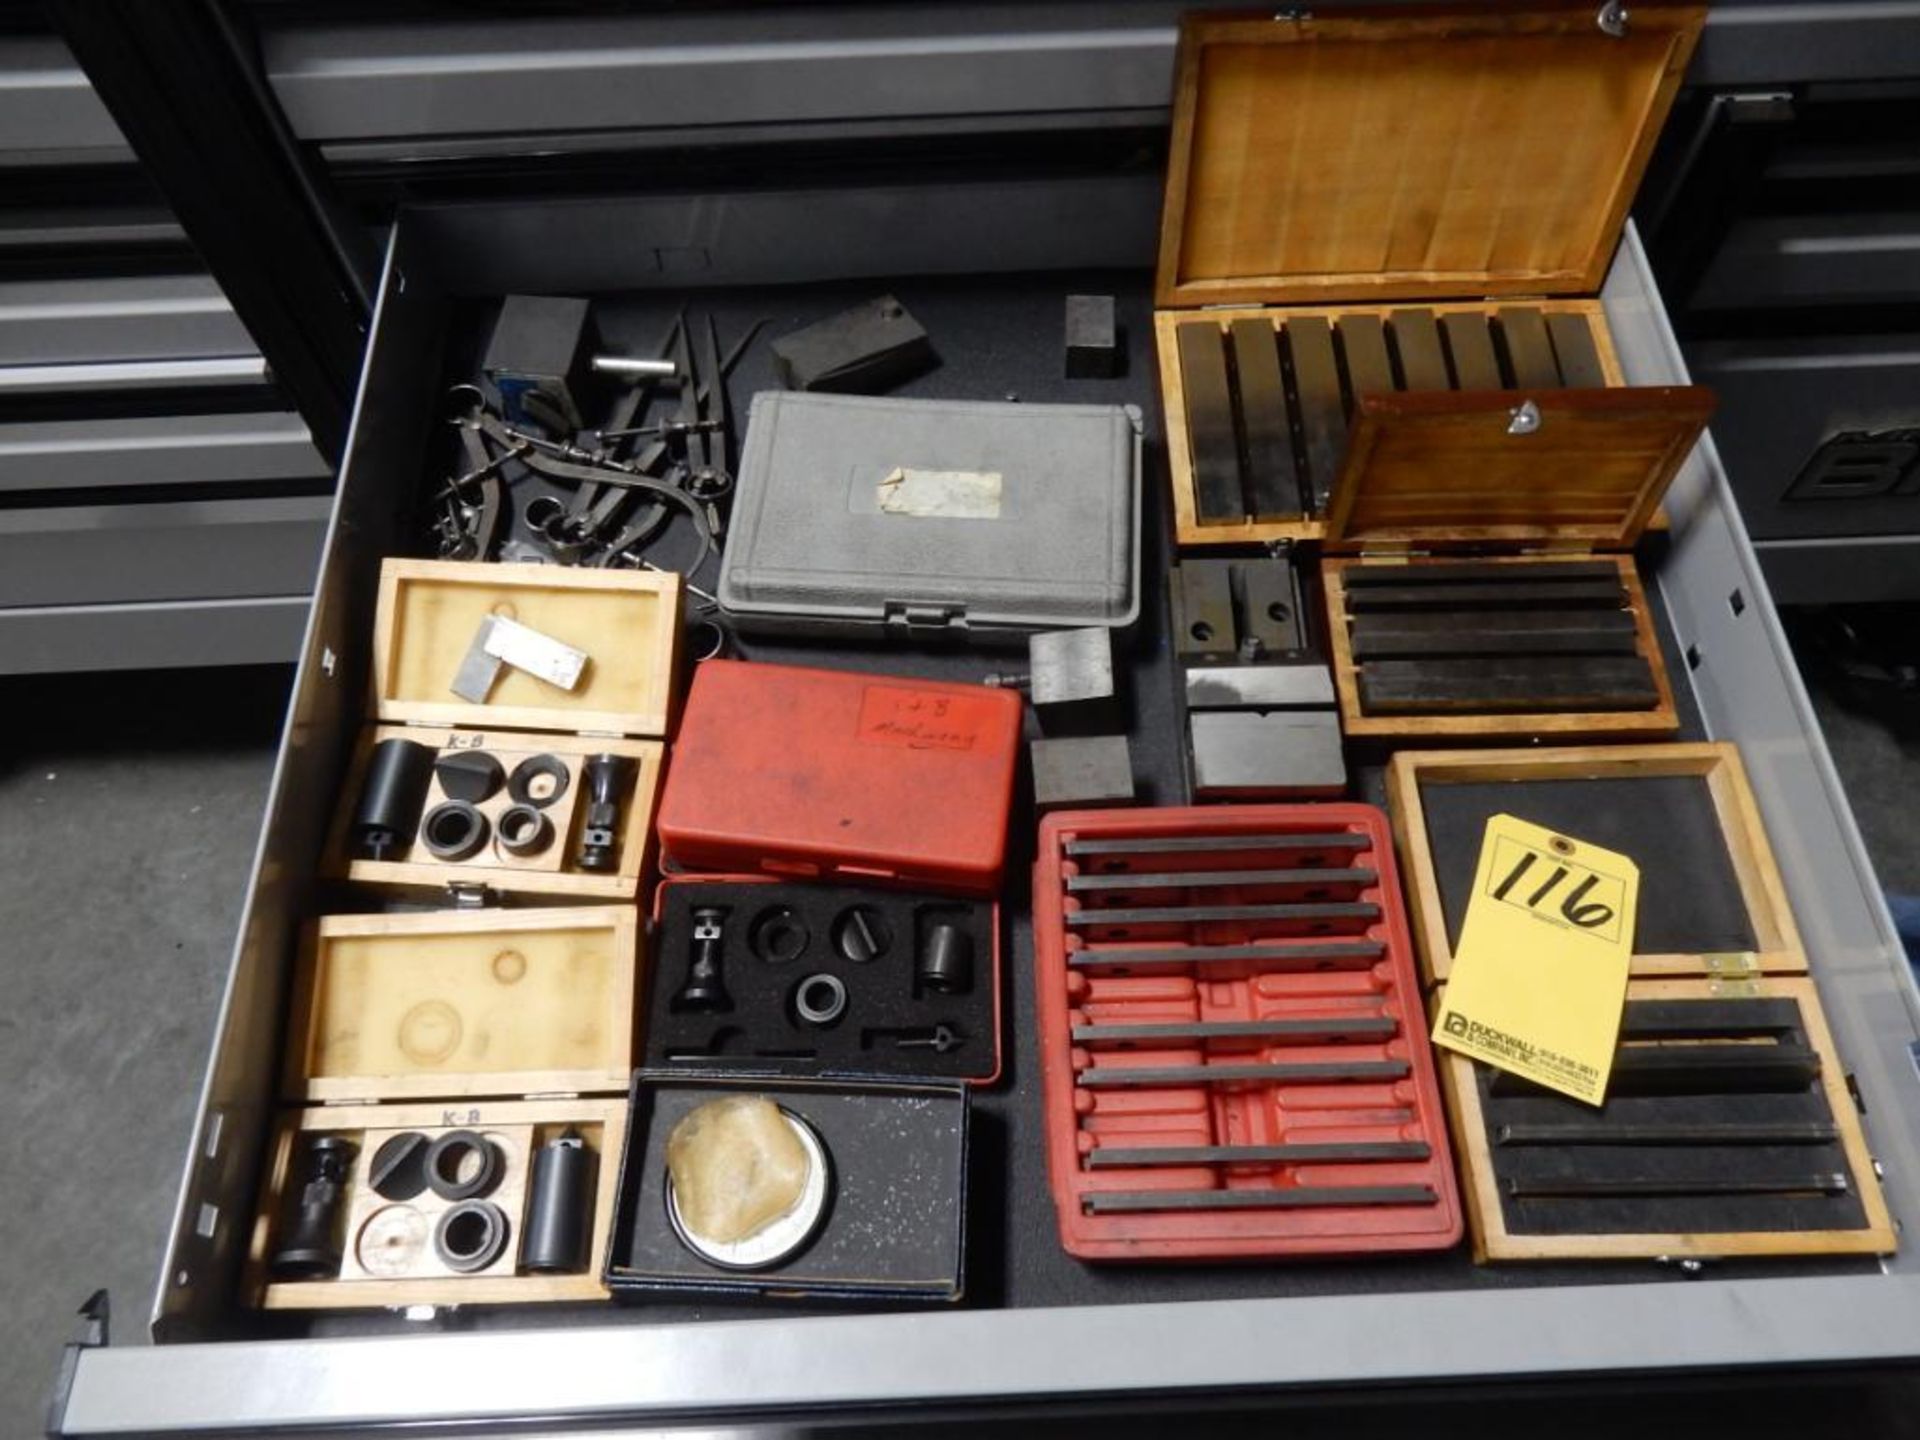 CONTENTS OF DRAWER - PARALLELS, DIVIDERS, VISE, ETC.